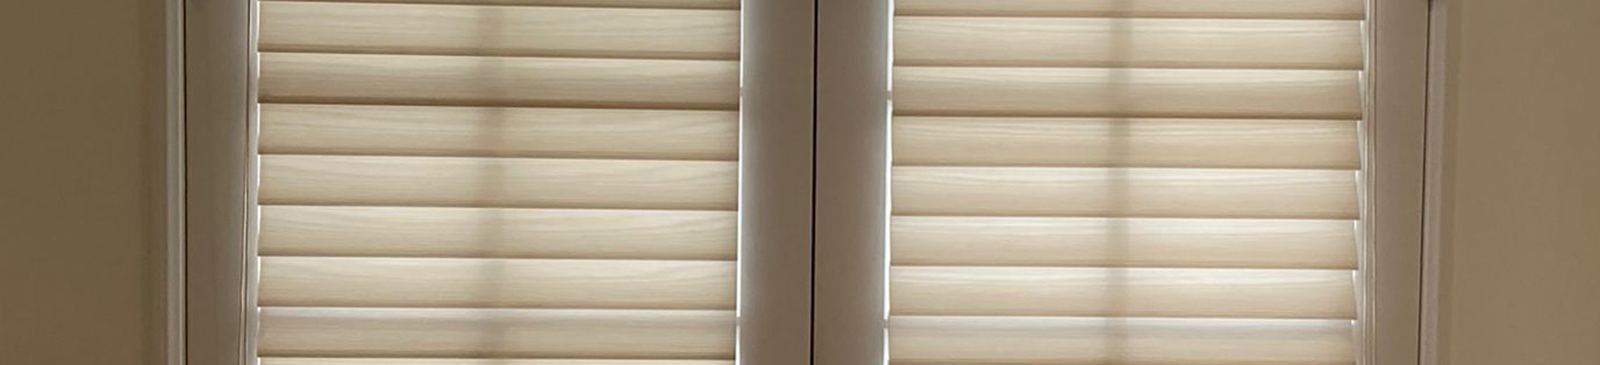 Anaheim Tranquility: Woven Wood Blinds by Yorba Linda Blinds &amp; Shades